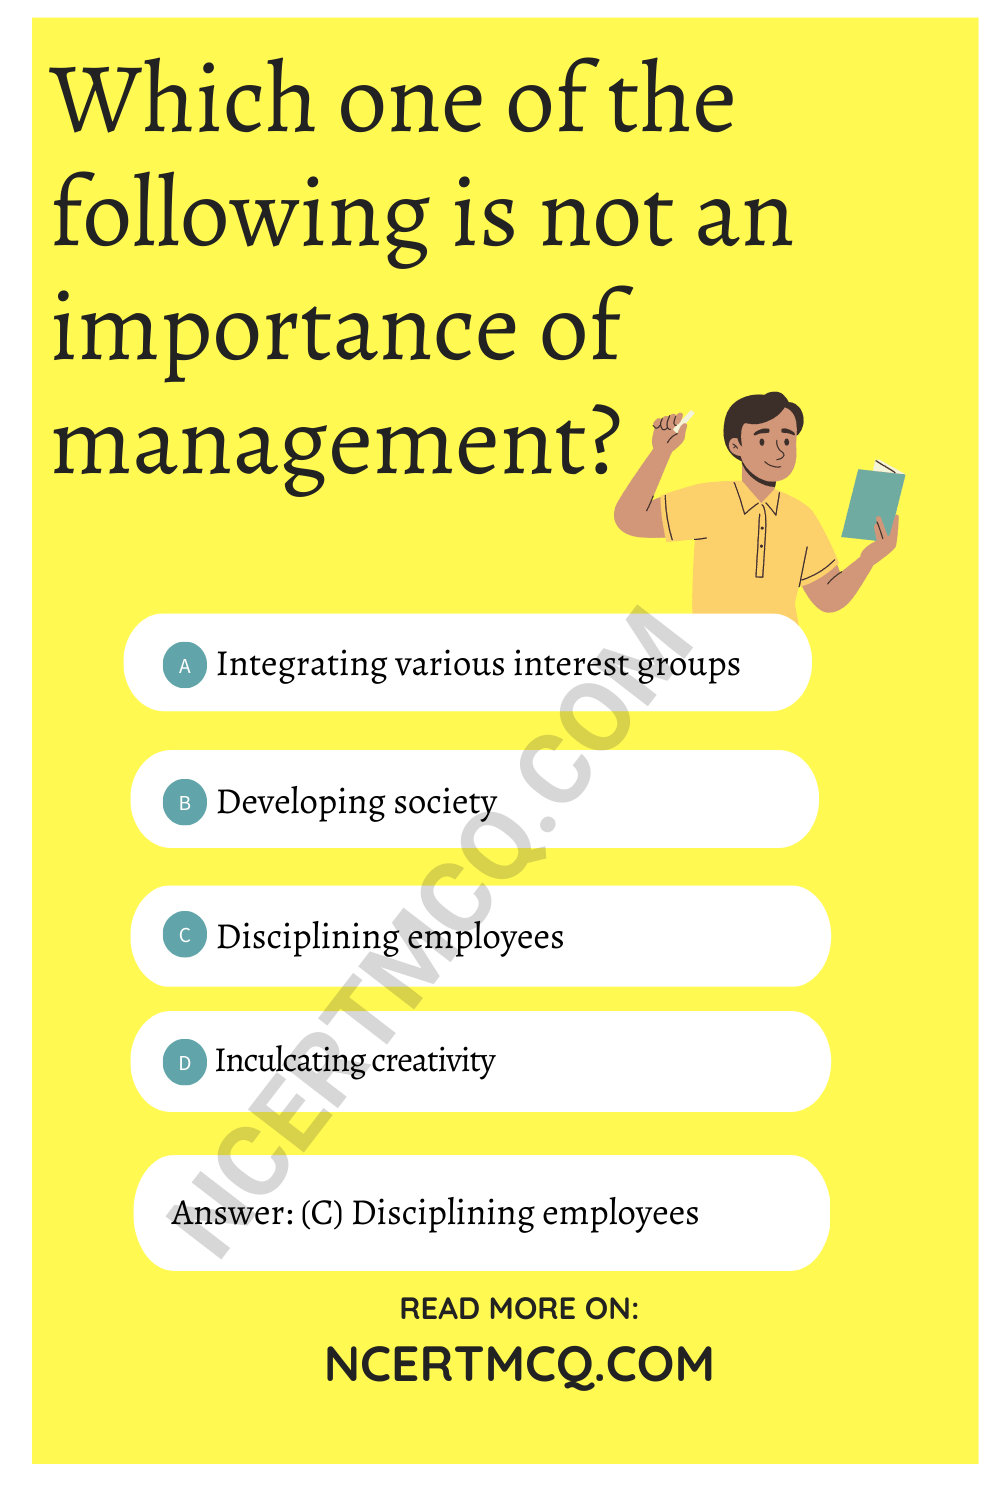 Which one of the following is not an importance of management?